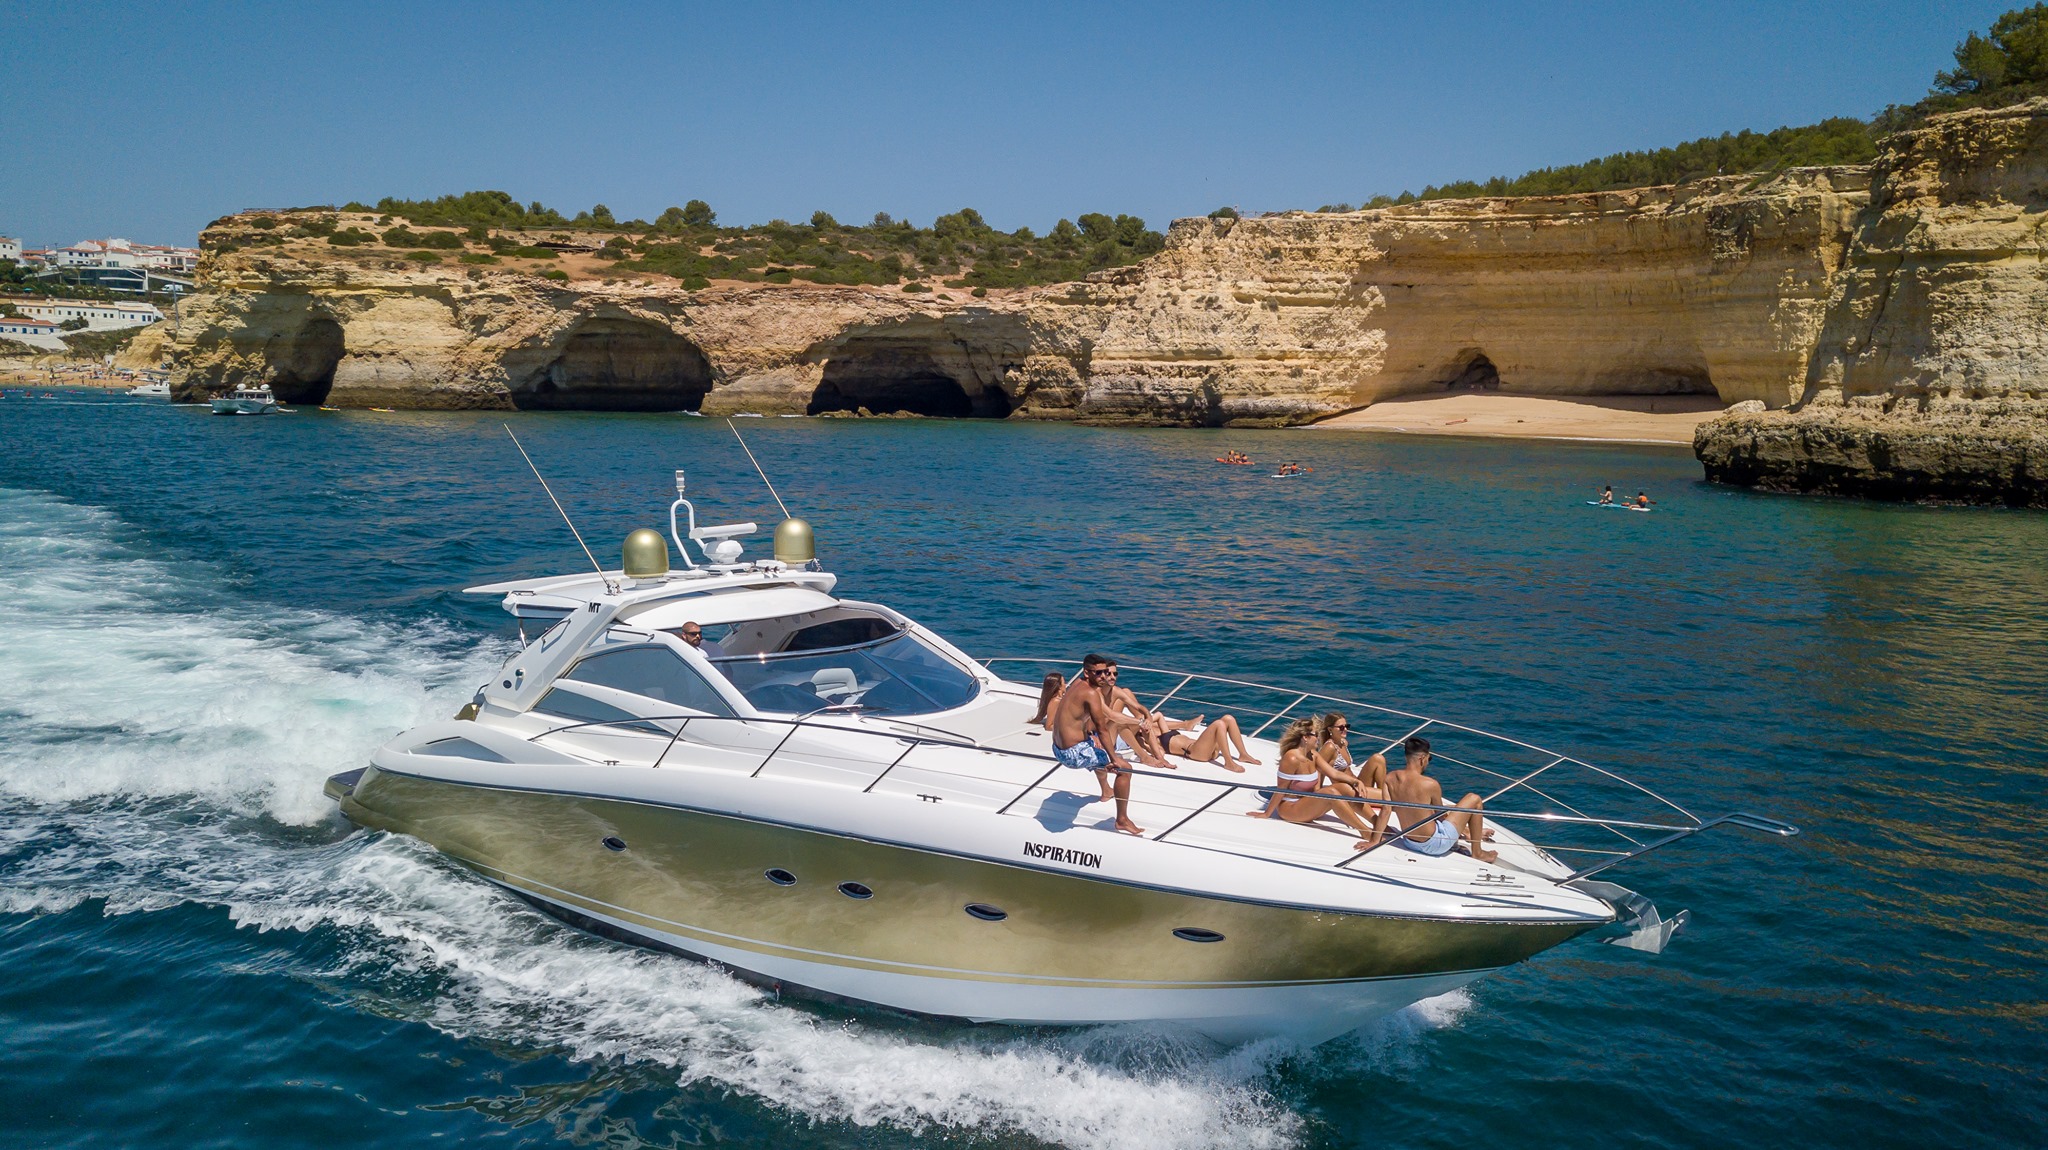 Book your private yacht in Albufeira